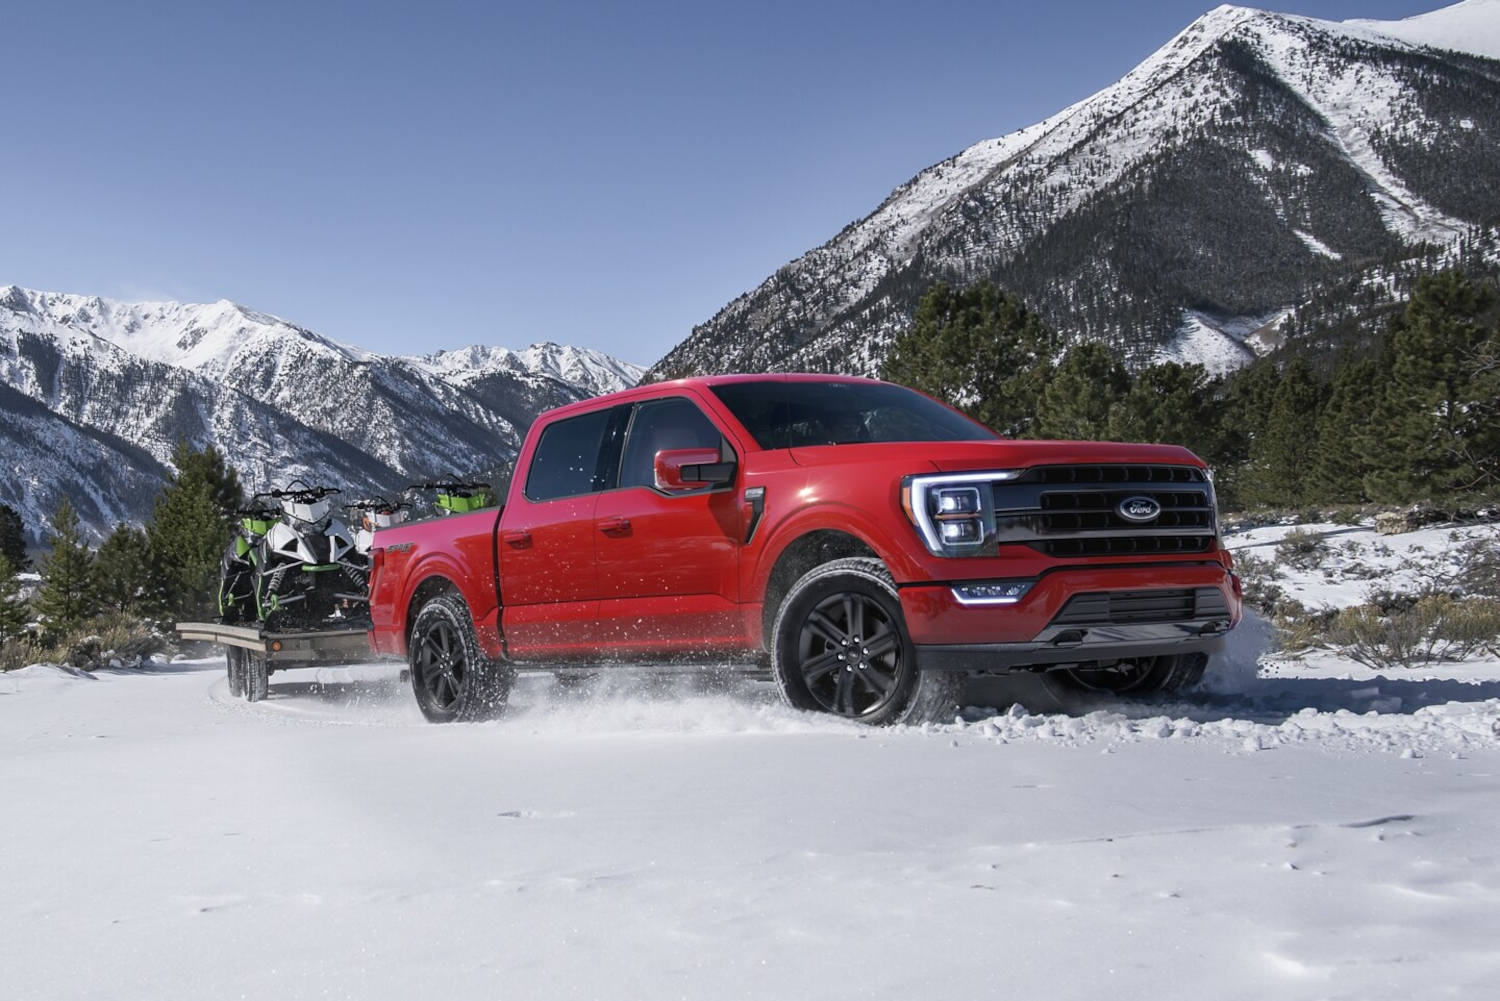 The longest-lasting cars include trucks like the Ford F-150